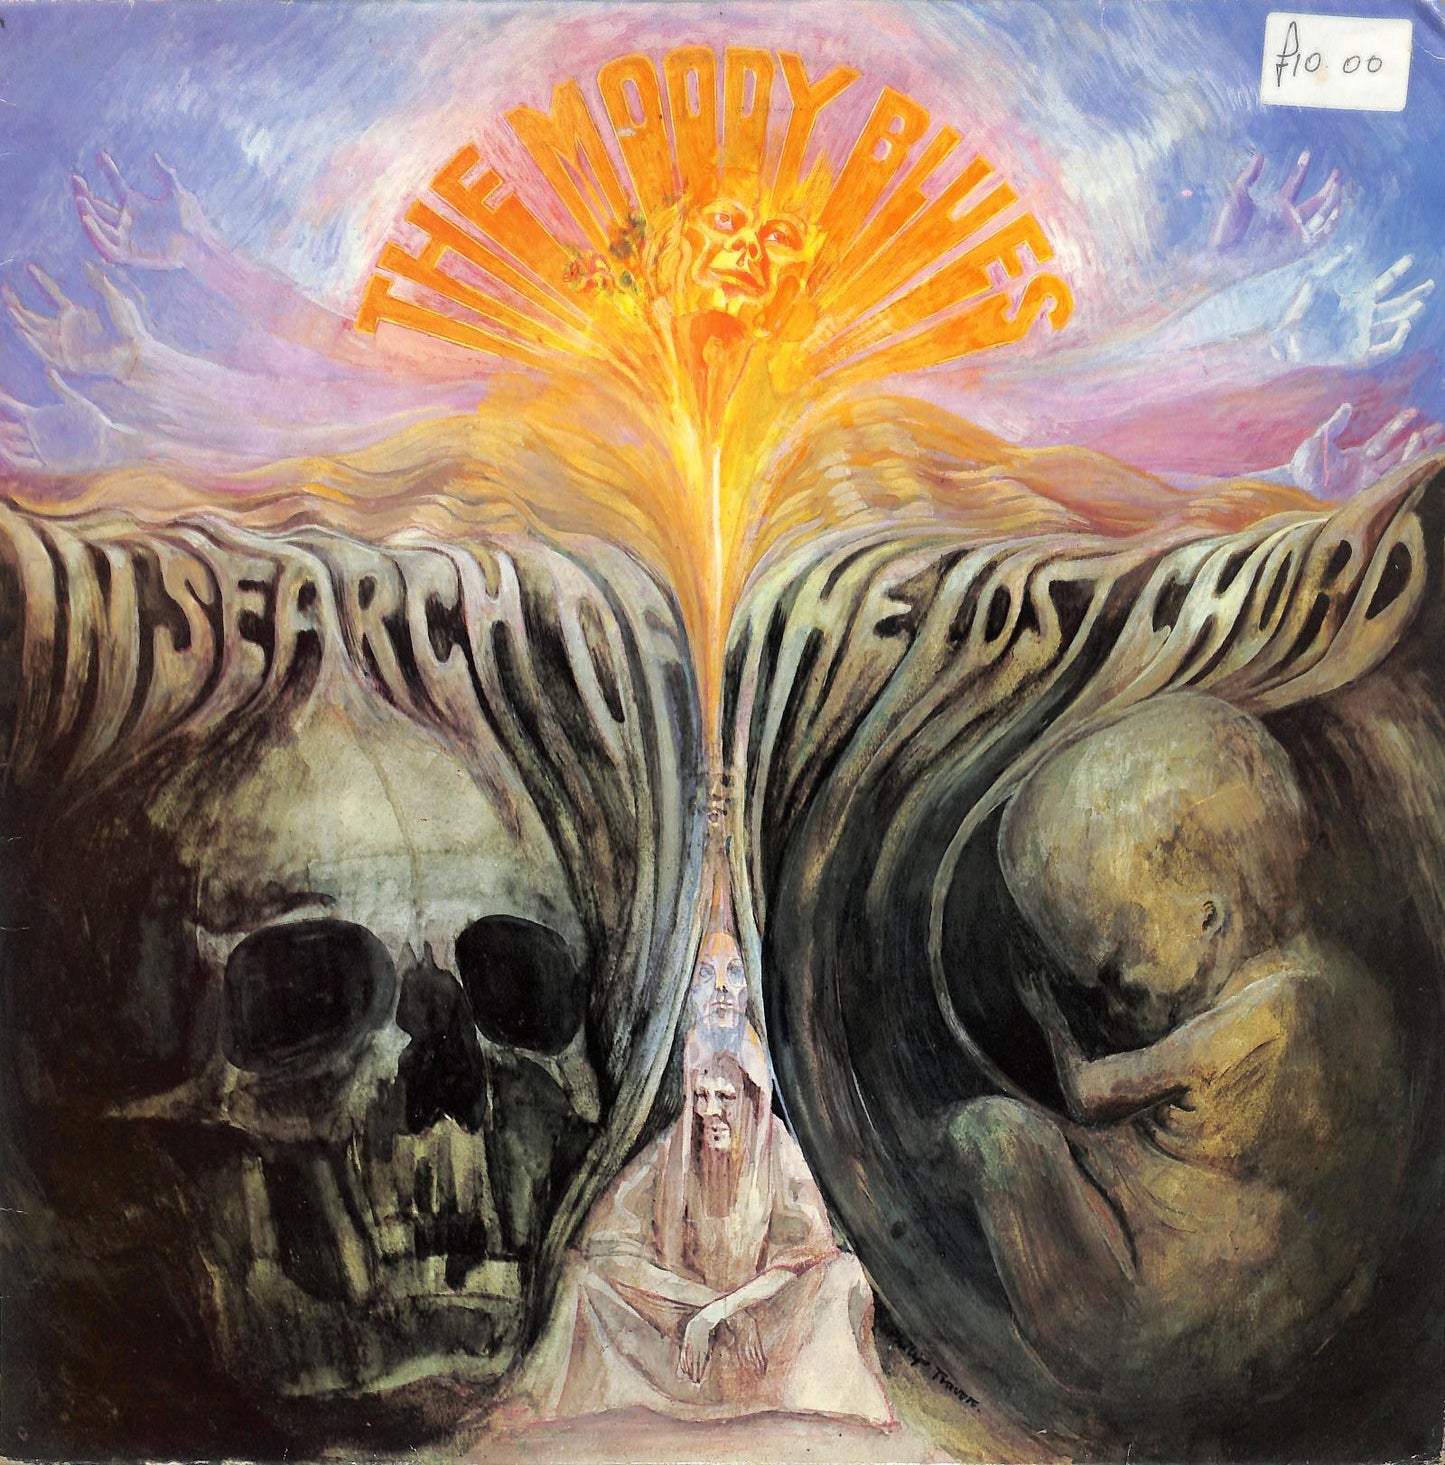 THE MOODY BLUES - In Search Of The Lost Chord